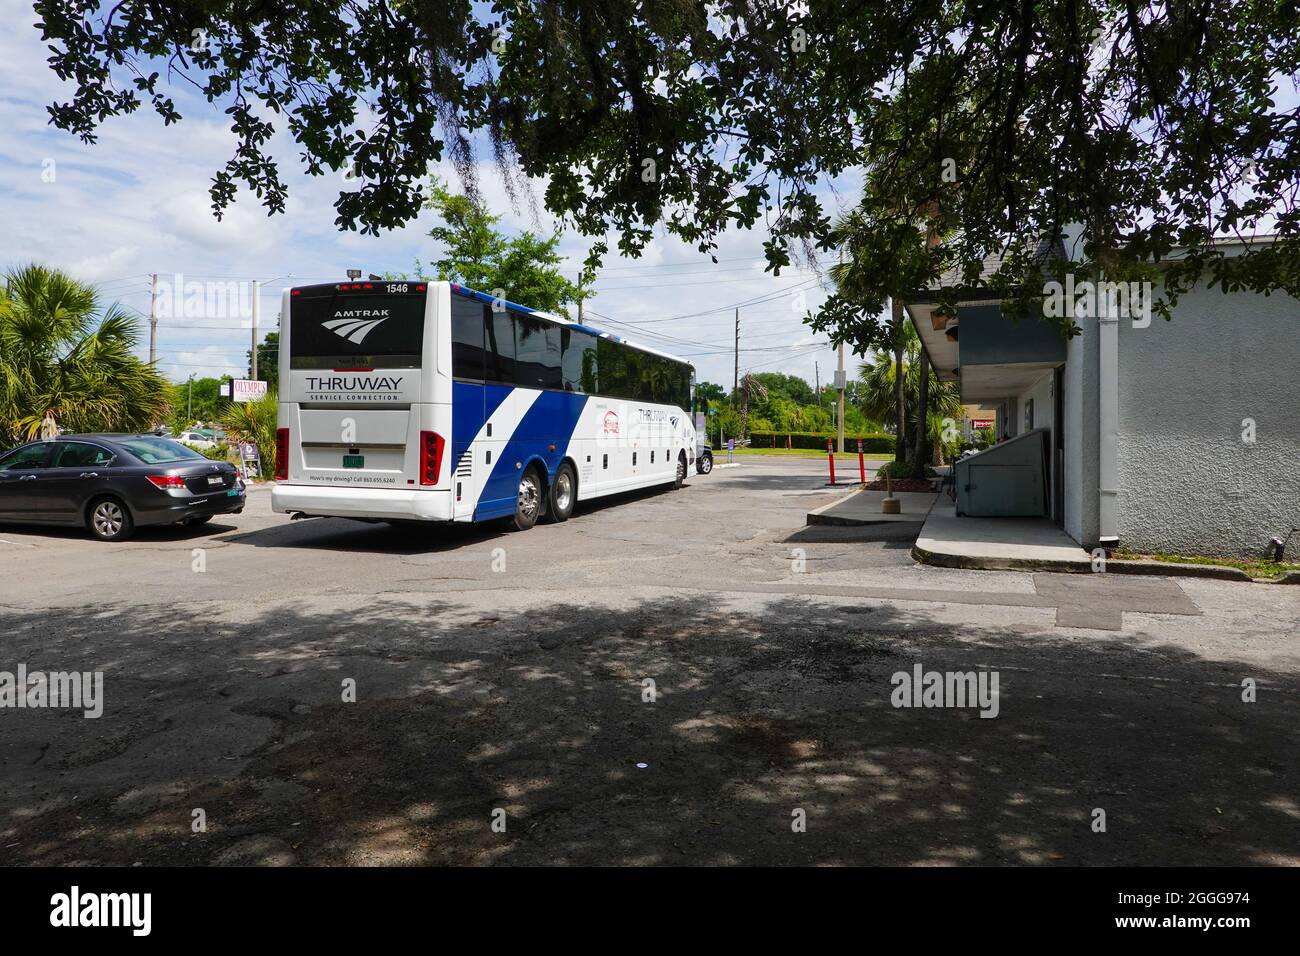 Amtrak bus parked in the Greyhound parking lot. Connection to the Jacksonville train station for cities of Ocala, Gainesville, and Waldo, Florida. Stock Photo